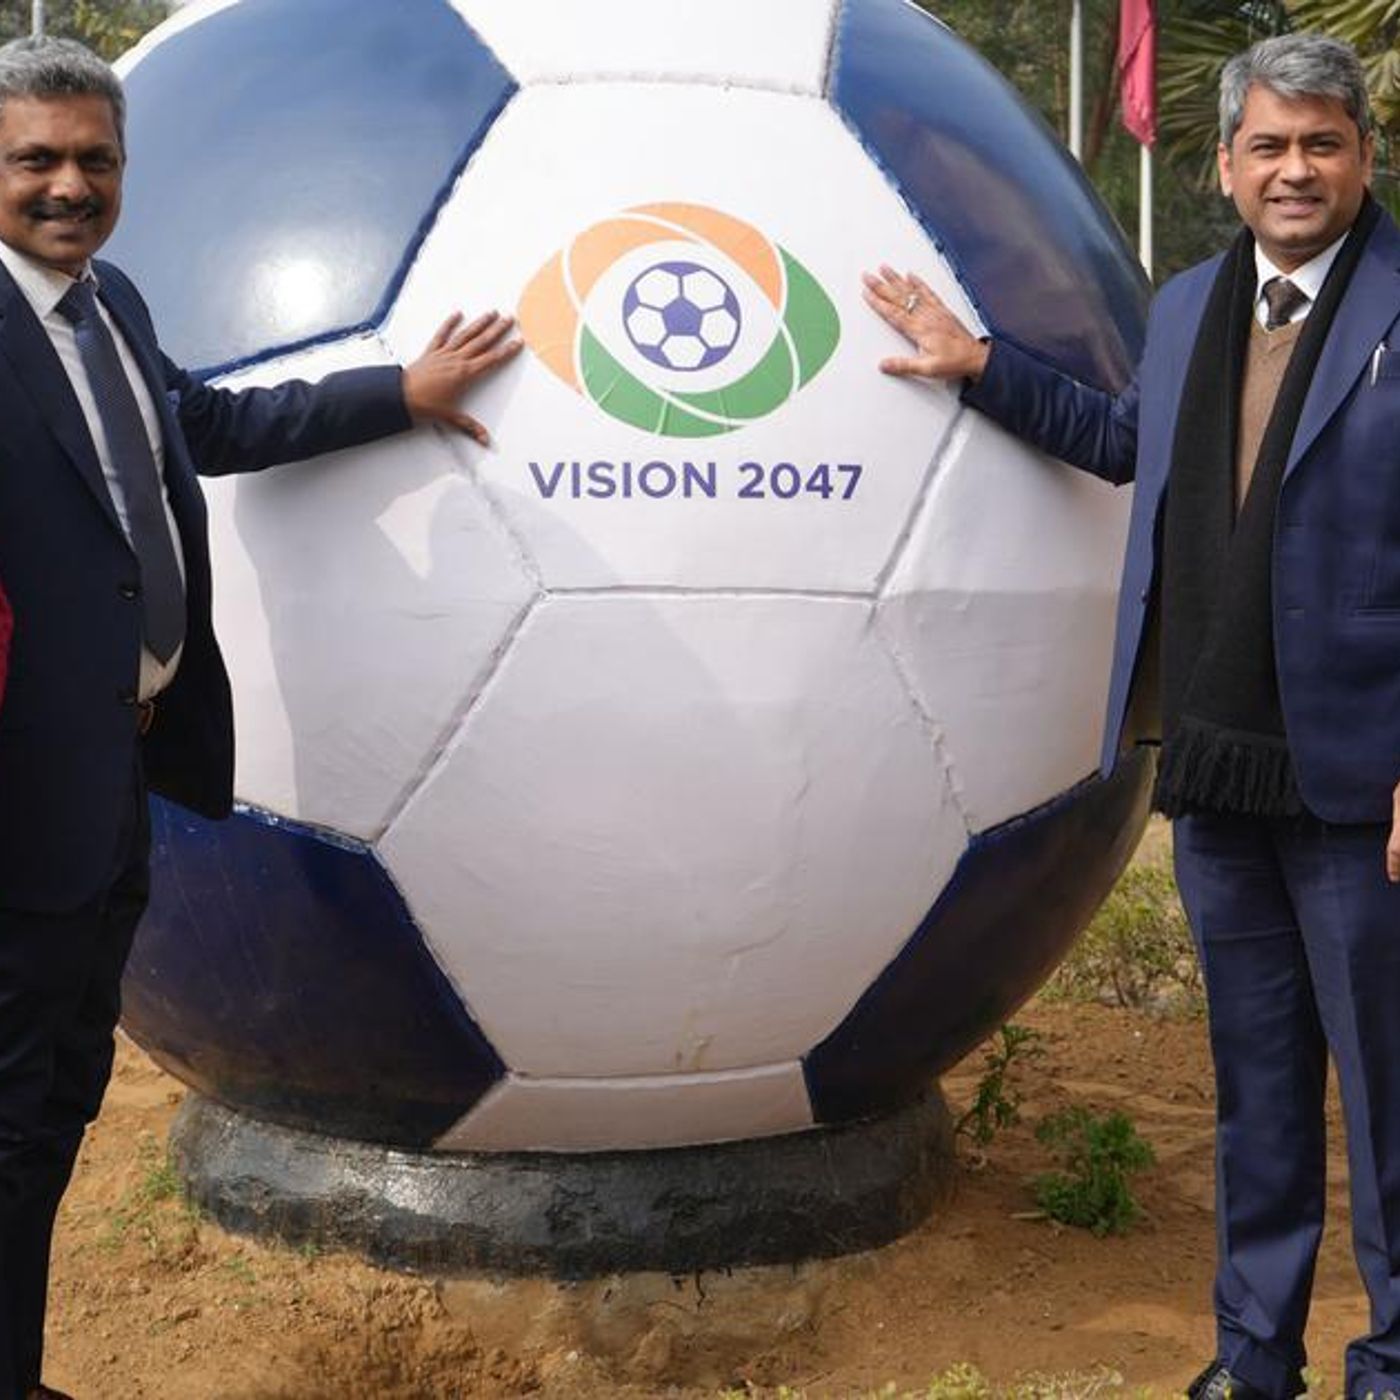 S9 Ep13: The roadmap and where it leads Indian football